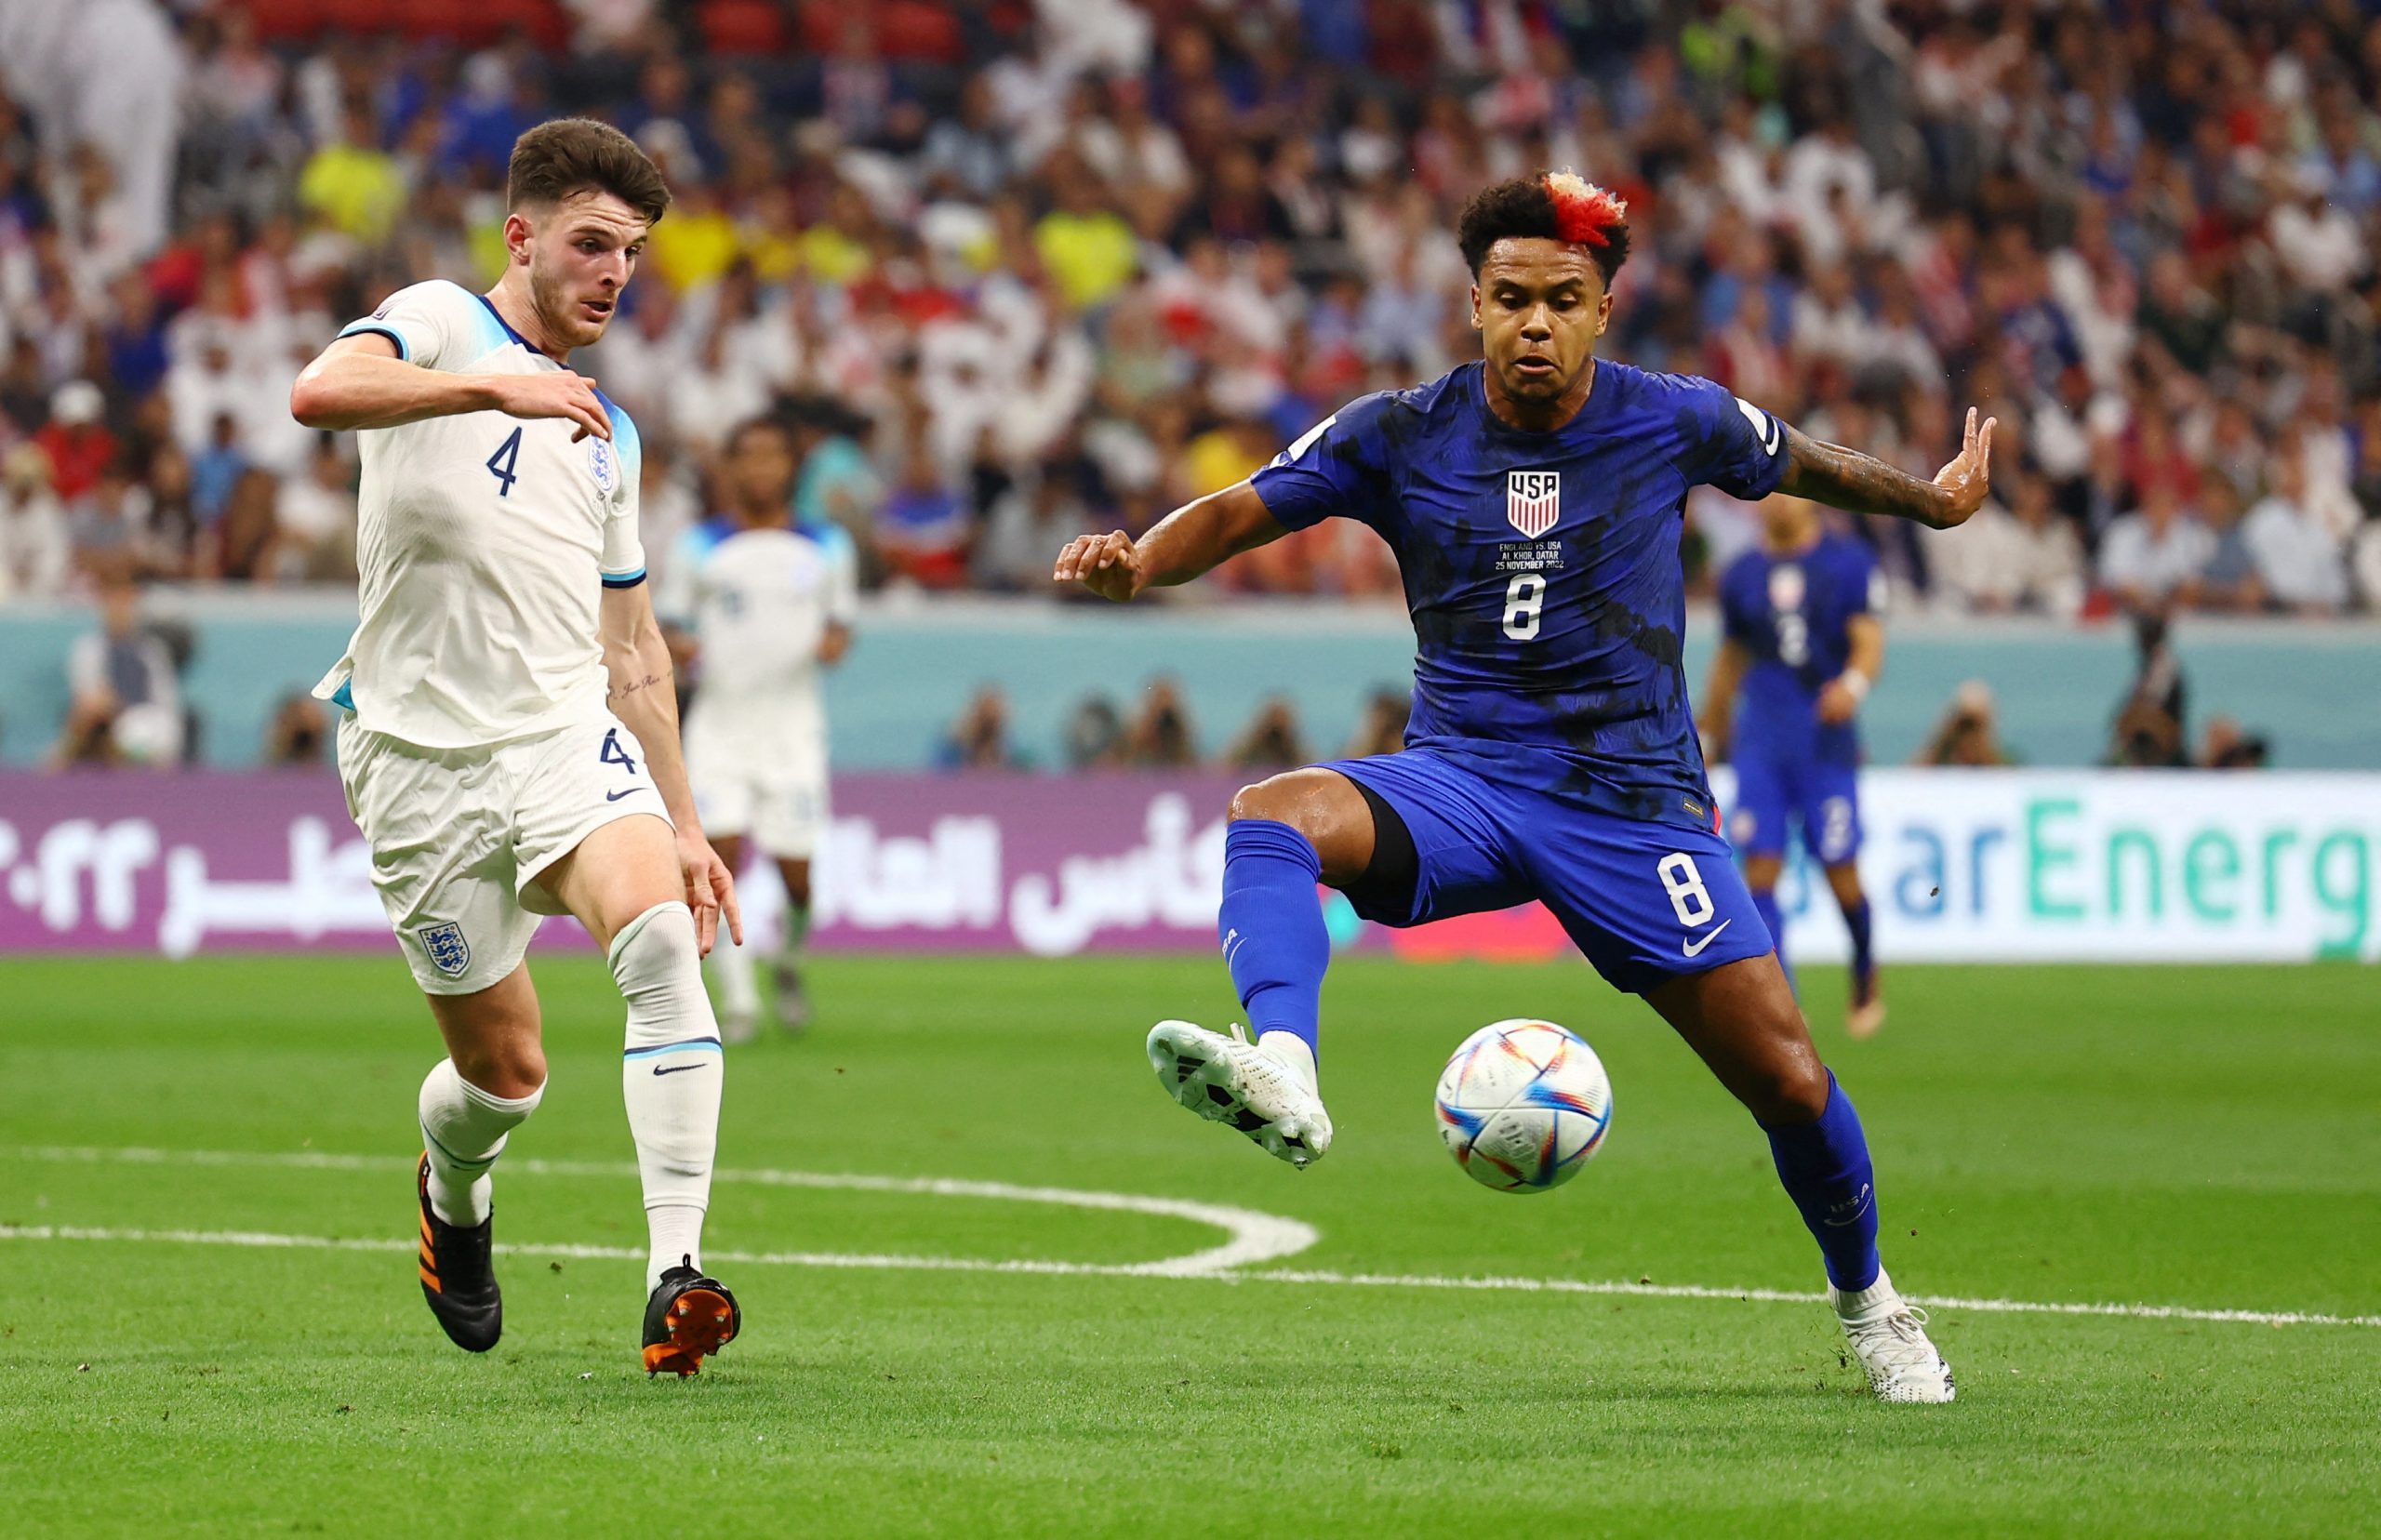 Everton: Weston McKennie could ‘bring a lot’ to the Toffees -Everton News